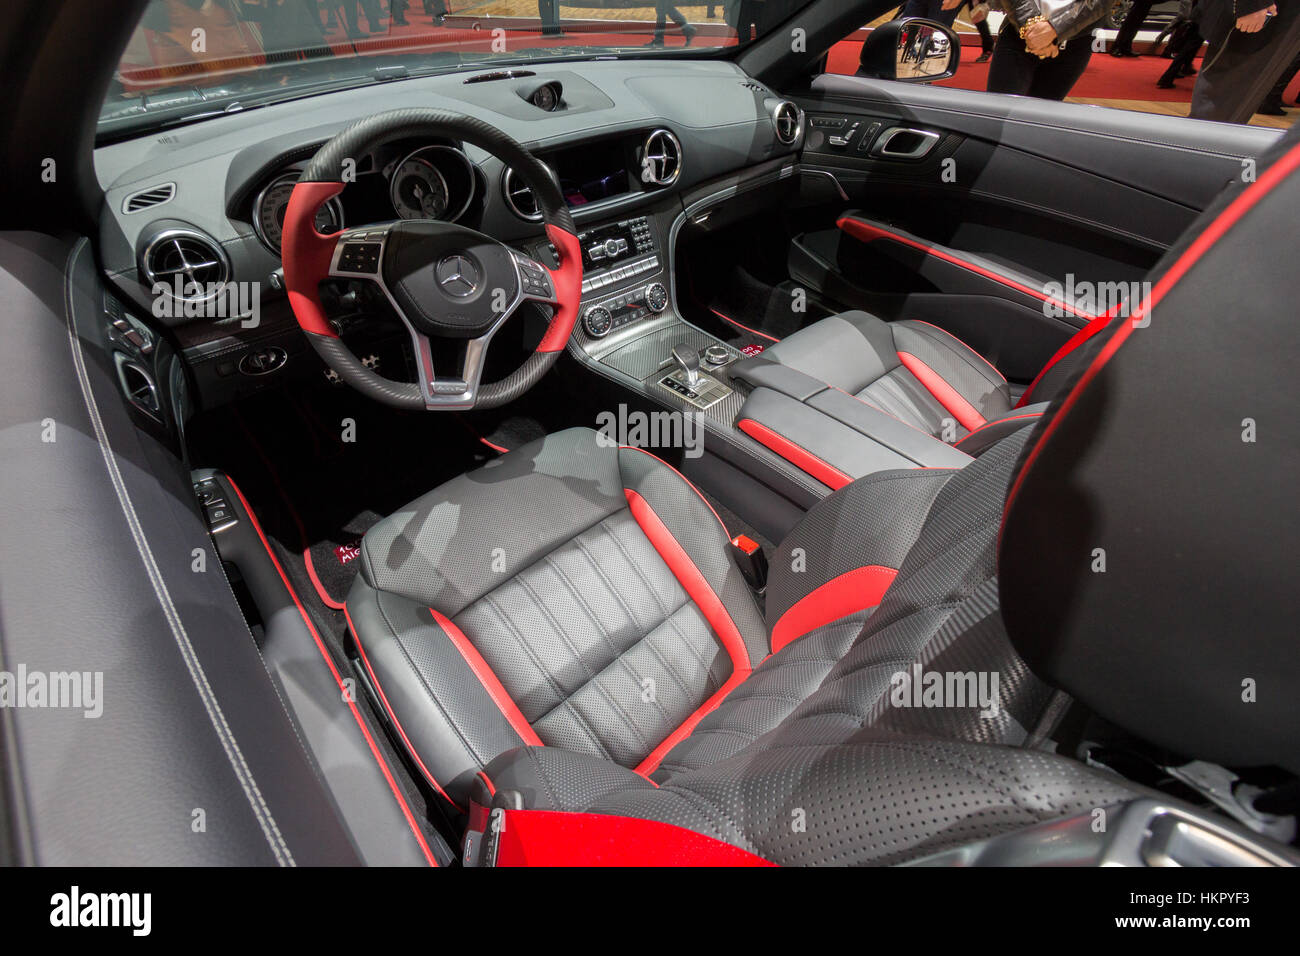 Mercedes Slk 200 High Resolution Stock Photography and Images - Alamy